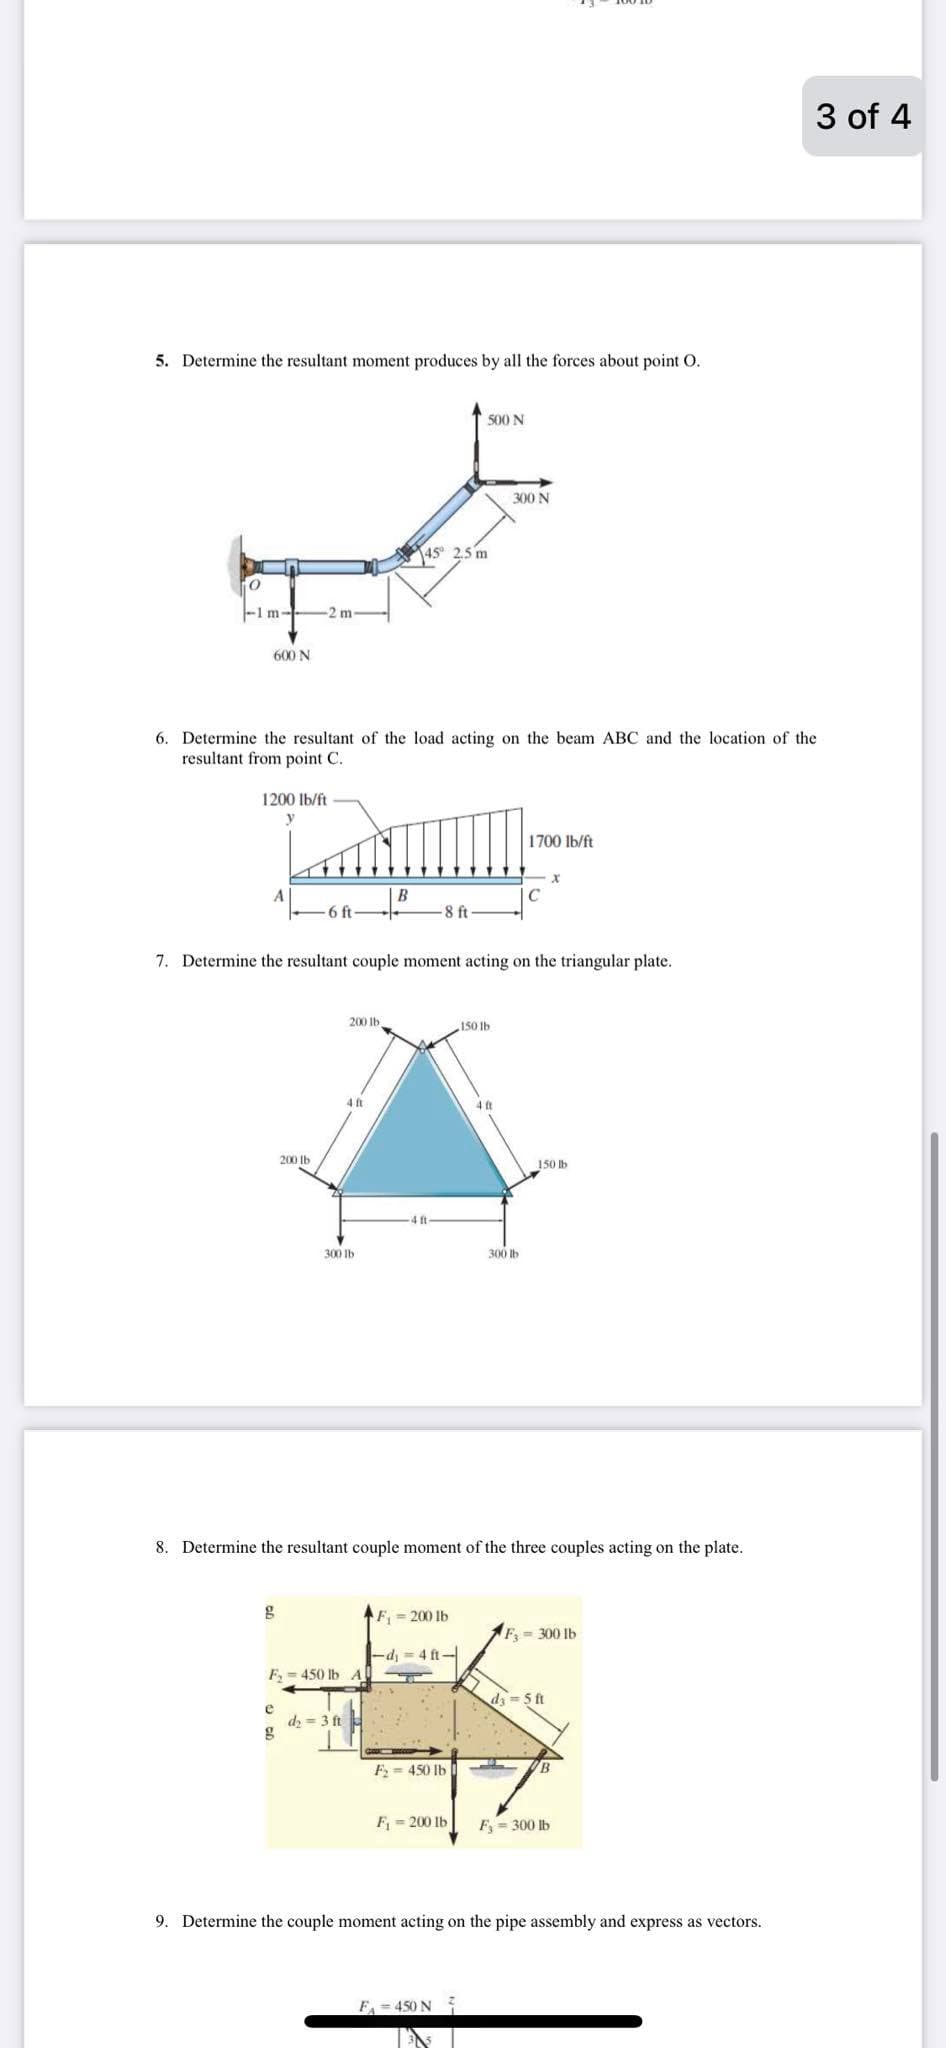 3 of 4
5. Determine the resultant moment produces by all the forces about point O.
500 N
300 N
45° 2,5 m
-1 m-
-2 m
600 N
6. Determine the resultant of the load acting on the beam ABC and the location of the
resultant from point C.
1200 lb/ft
1700 lb/ft
A
B
IC
6 ft
8 ft
7. Determine the resultant couple moment acting on the triangular plate.
200 Ib
150 lhb
200 Ib
150 lb
300 Ib
300 lb
8. Determine the resultant couple moment of the three couples acting on the plate.
F,- 200 lb
F= 300 lb
4 ft-
F, = 450 lb A
d = 5 ft
e
dz = 3 ft
g
F= 450 Ib
B
F = 200 Ib
F = 300 lb
9. Determine the couple moment acting on the pipe assembly and express as vectors.
F - 450 N
